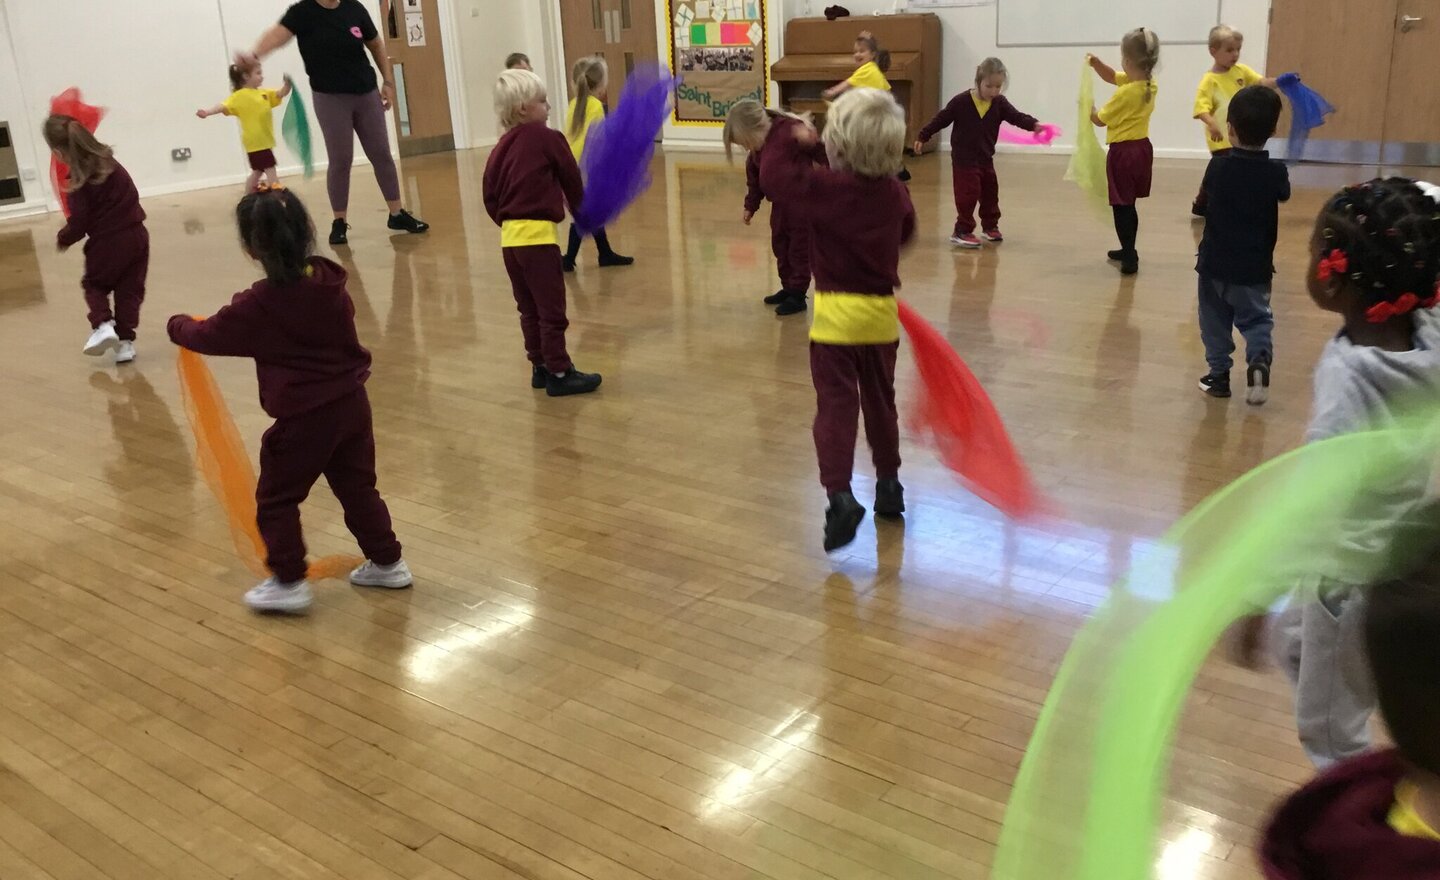 Image of Rhythm dancing with scarves in PE